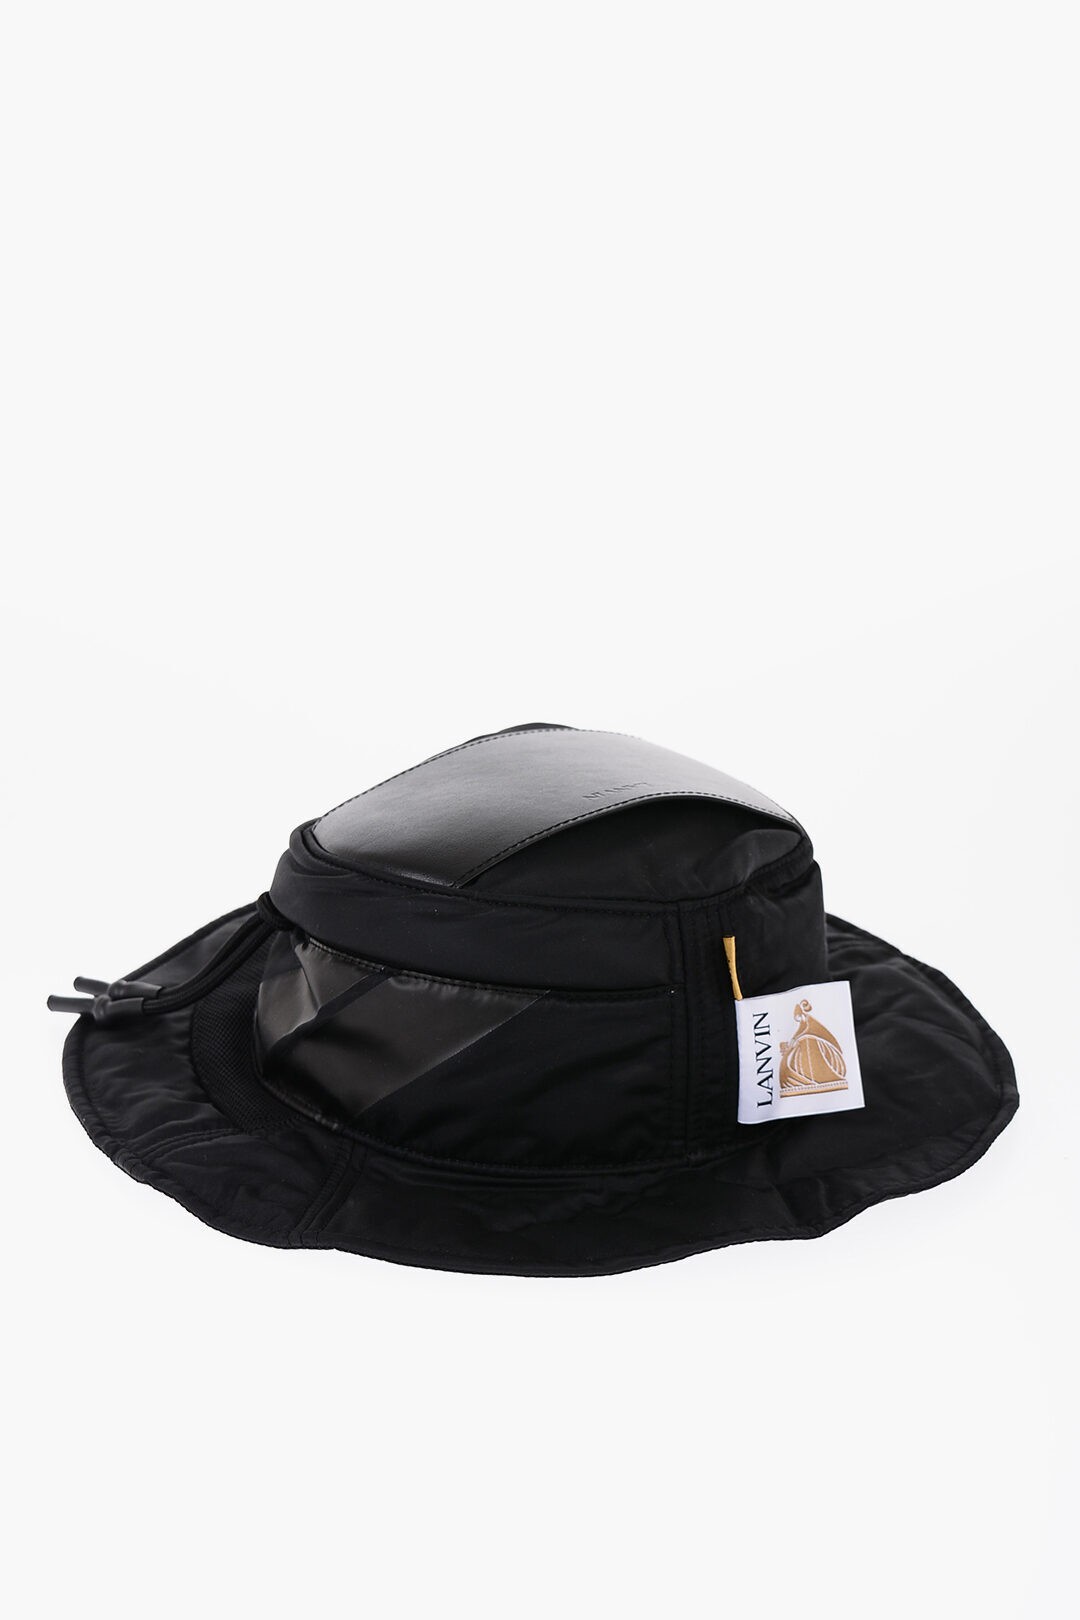 LANVIN ランバン 帽子 AM-HANHGDNYGD 10 メンズ GALLERY DEPT BUSHMASTER HAT WITH LEATHER DETAIL 【関税 送料無料】【ラッピング無料】 dk